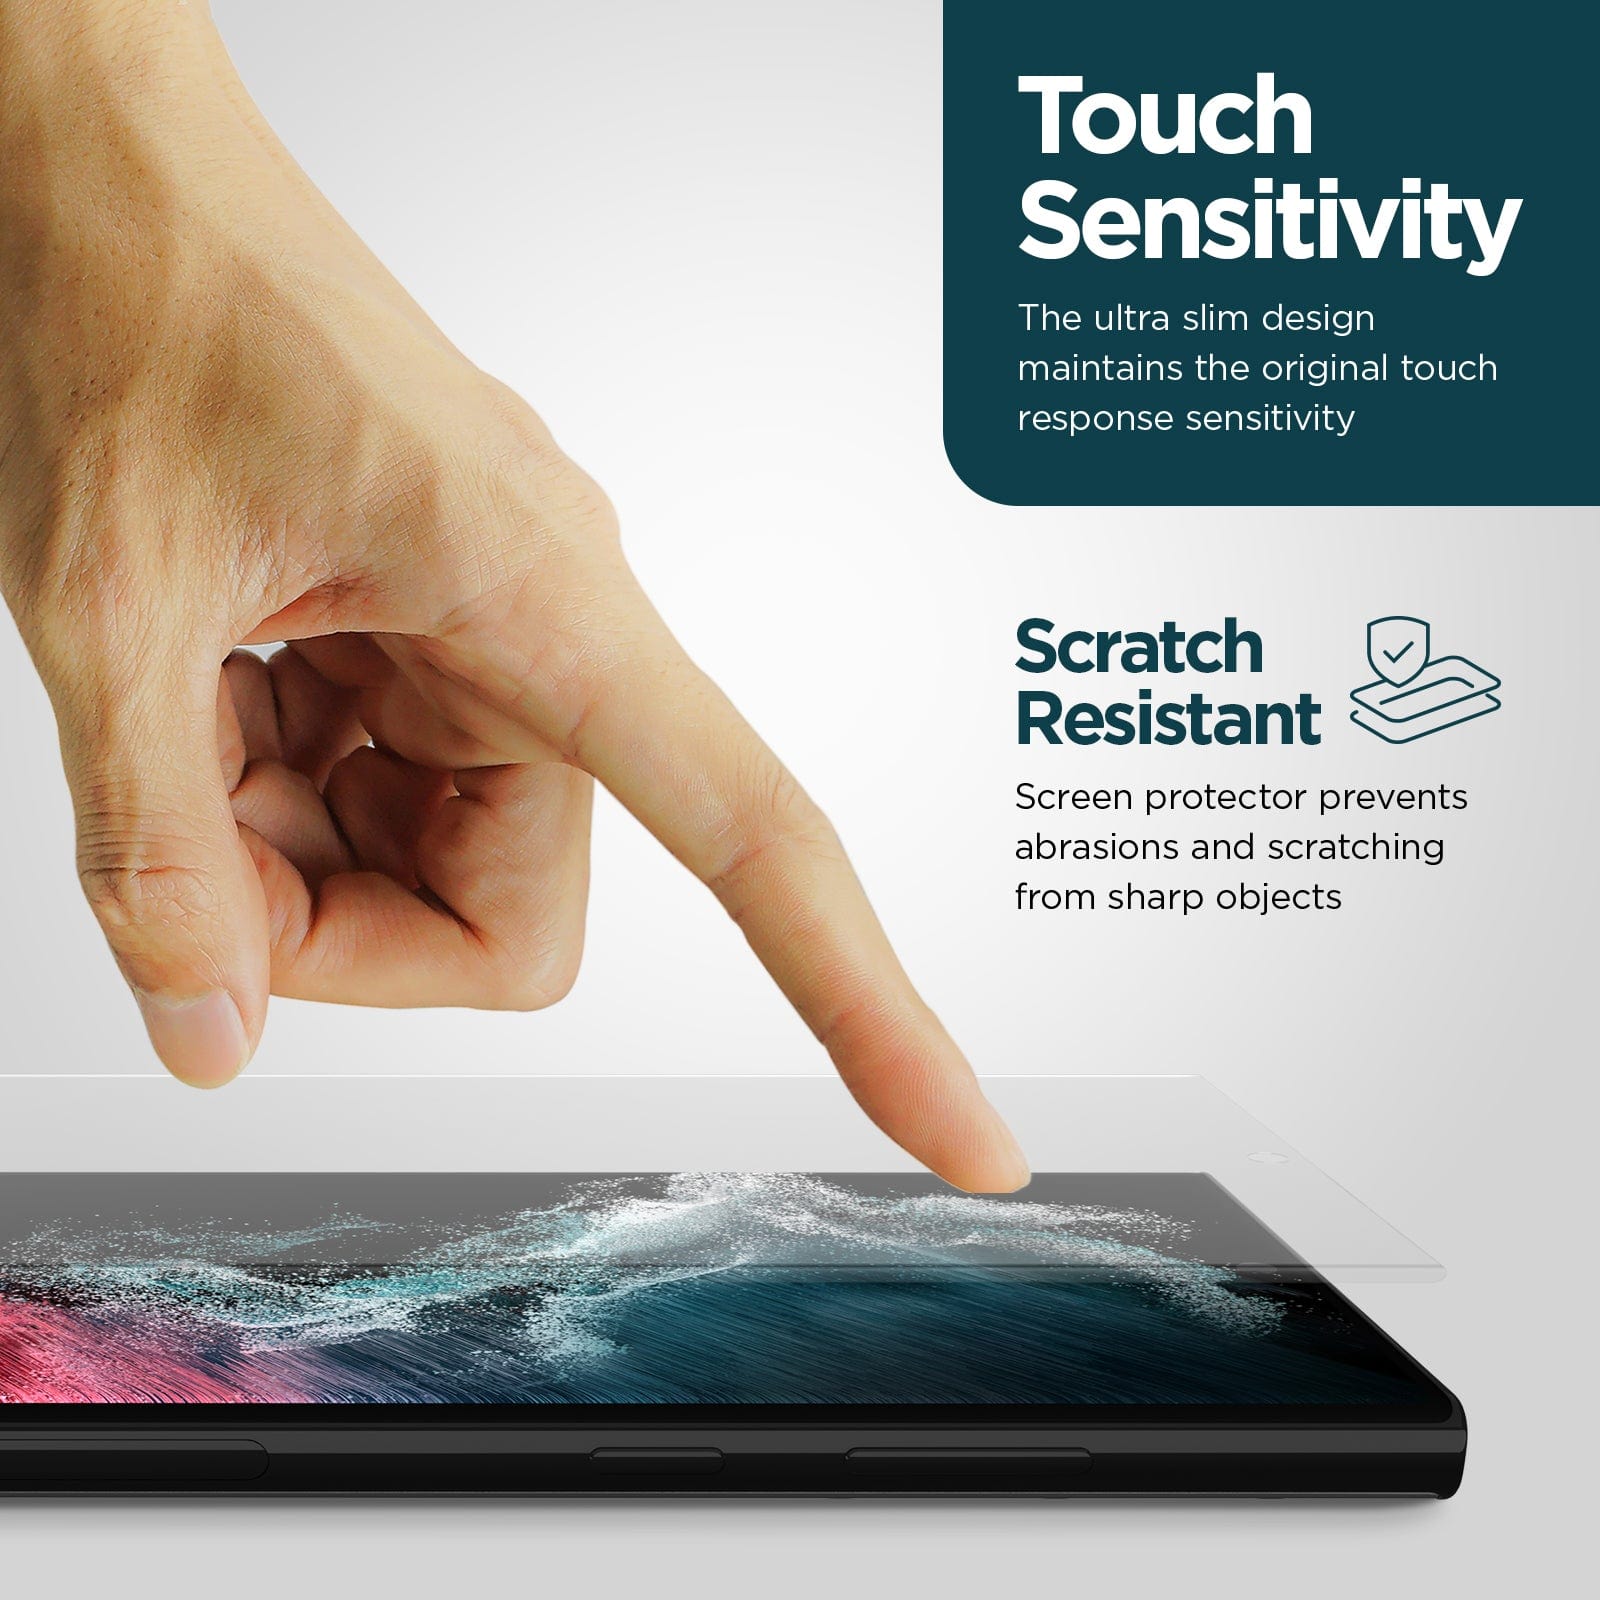 TOUCH SENSITIVITY. THE ULTRA SLIM DESIGN MAINTAINS THE ORIGINAL TOUCH RESPONSE SENSITIVITY. SCRATCH RESISTANT SCREEN PROTECTOR PREVENTS ABRASIONS AND SCRATCHING FROM SHARP OBJECTS.